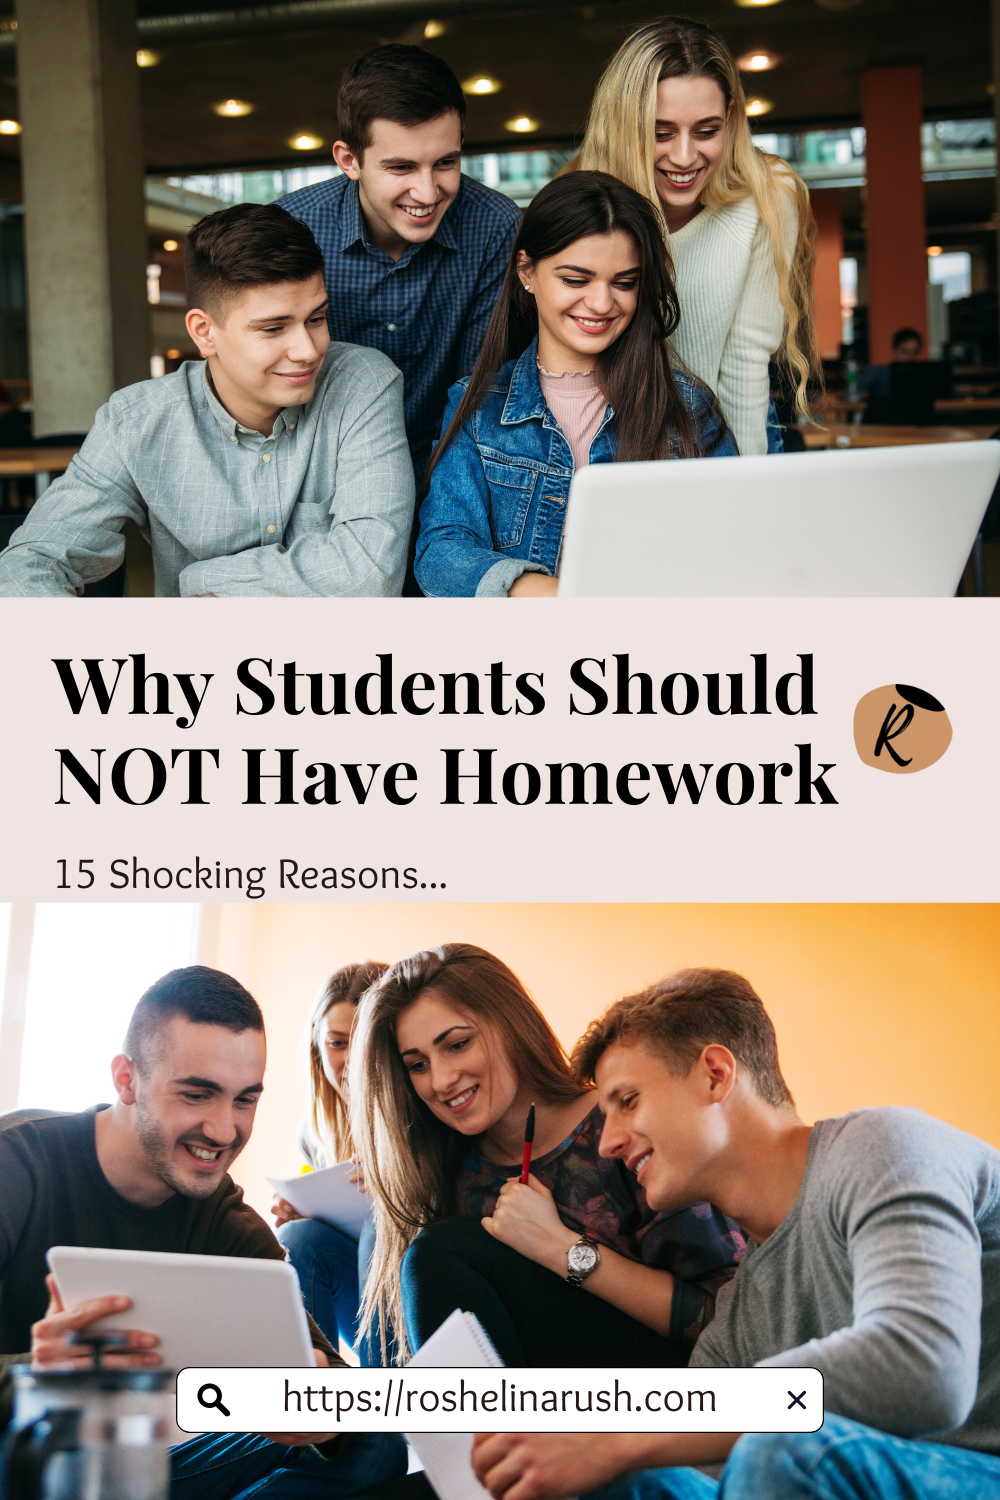 evidence why students should have less homework